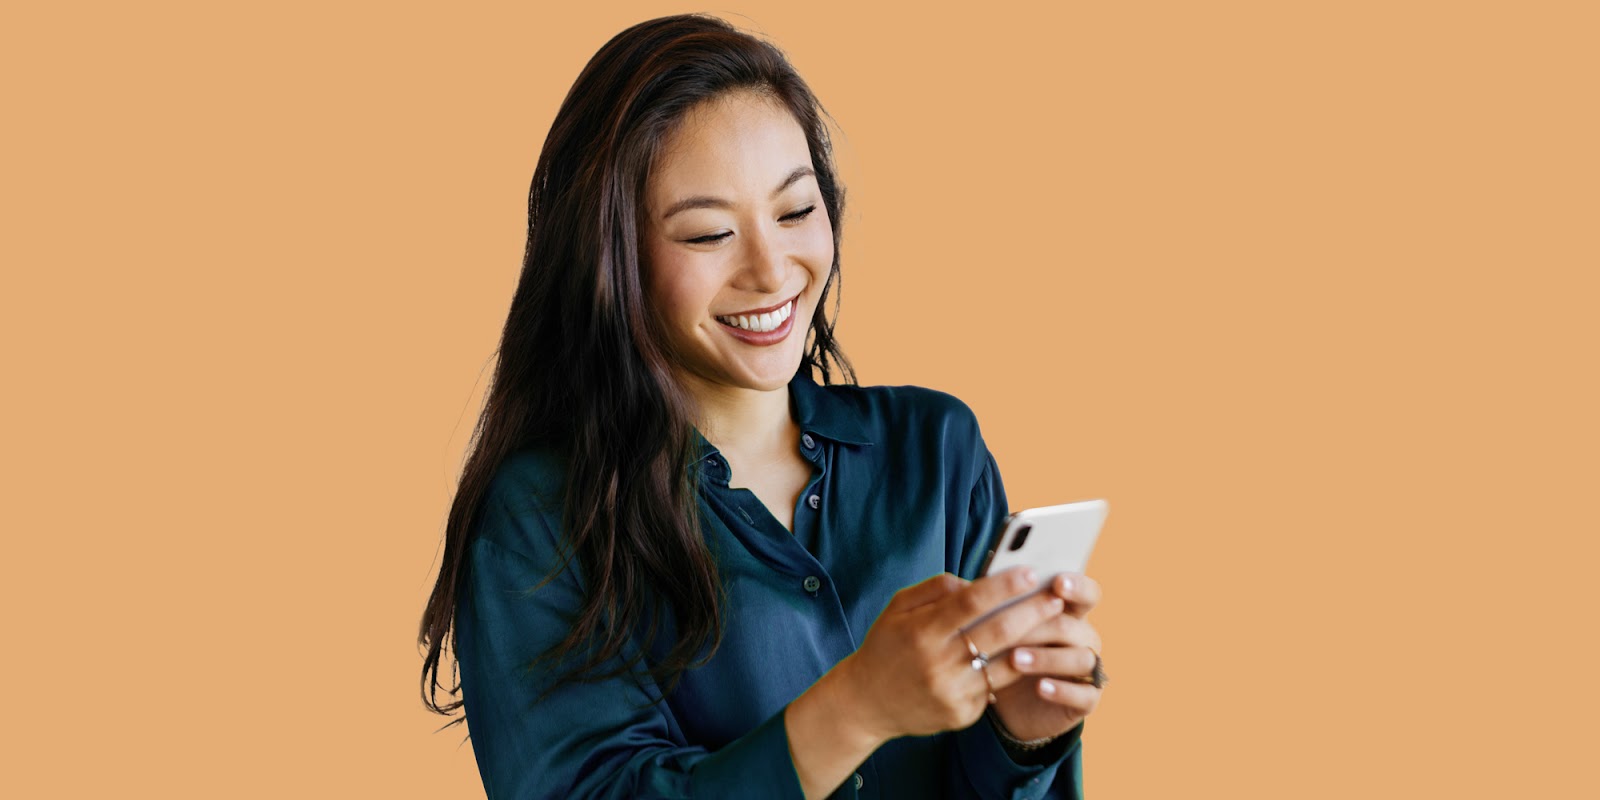 Graphic of a woman texting on an orange background